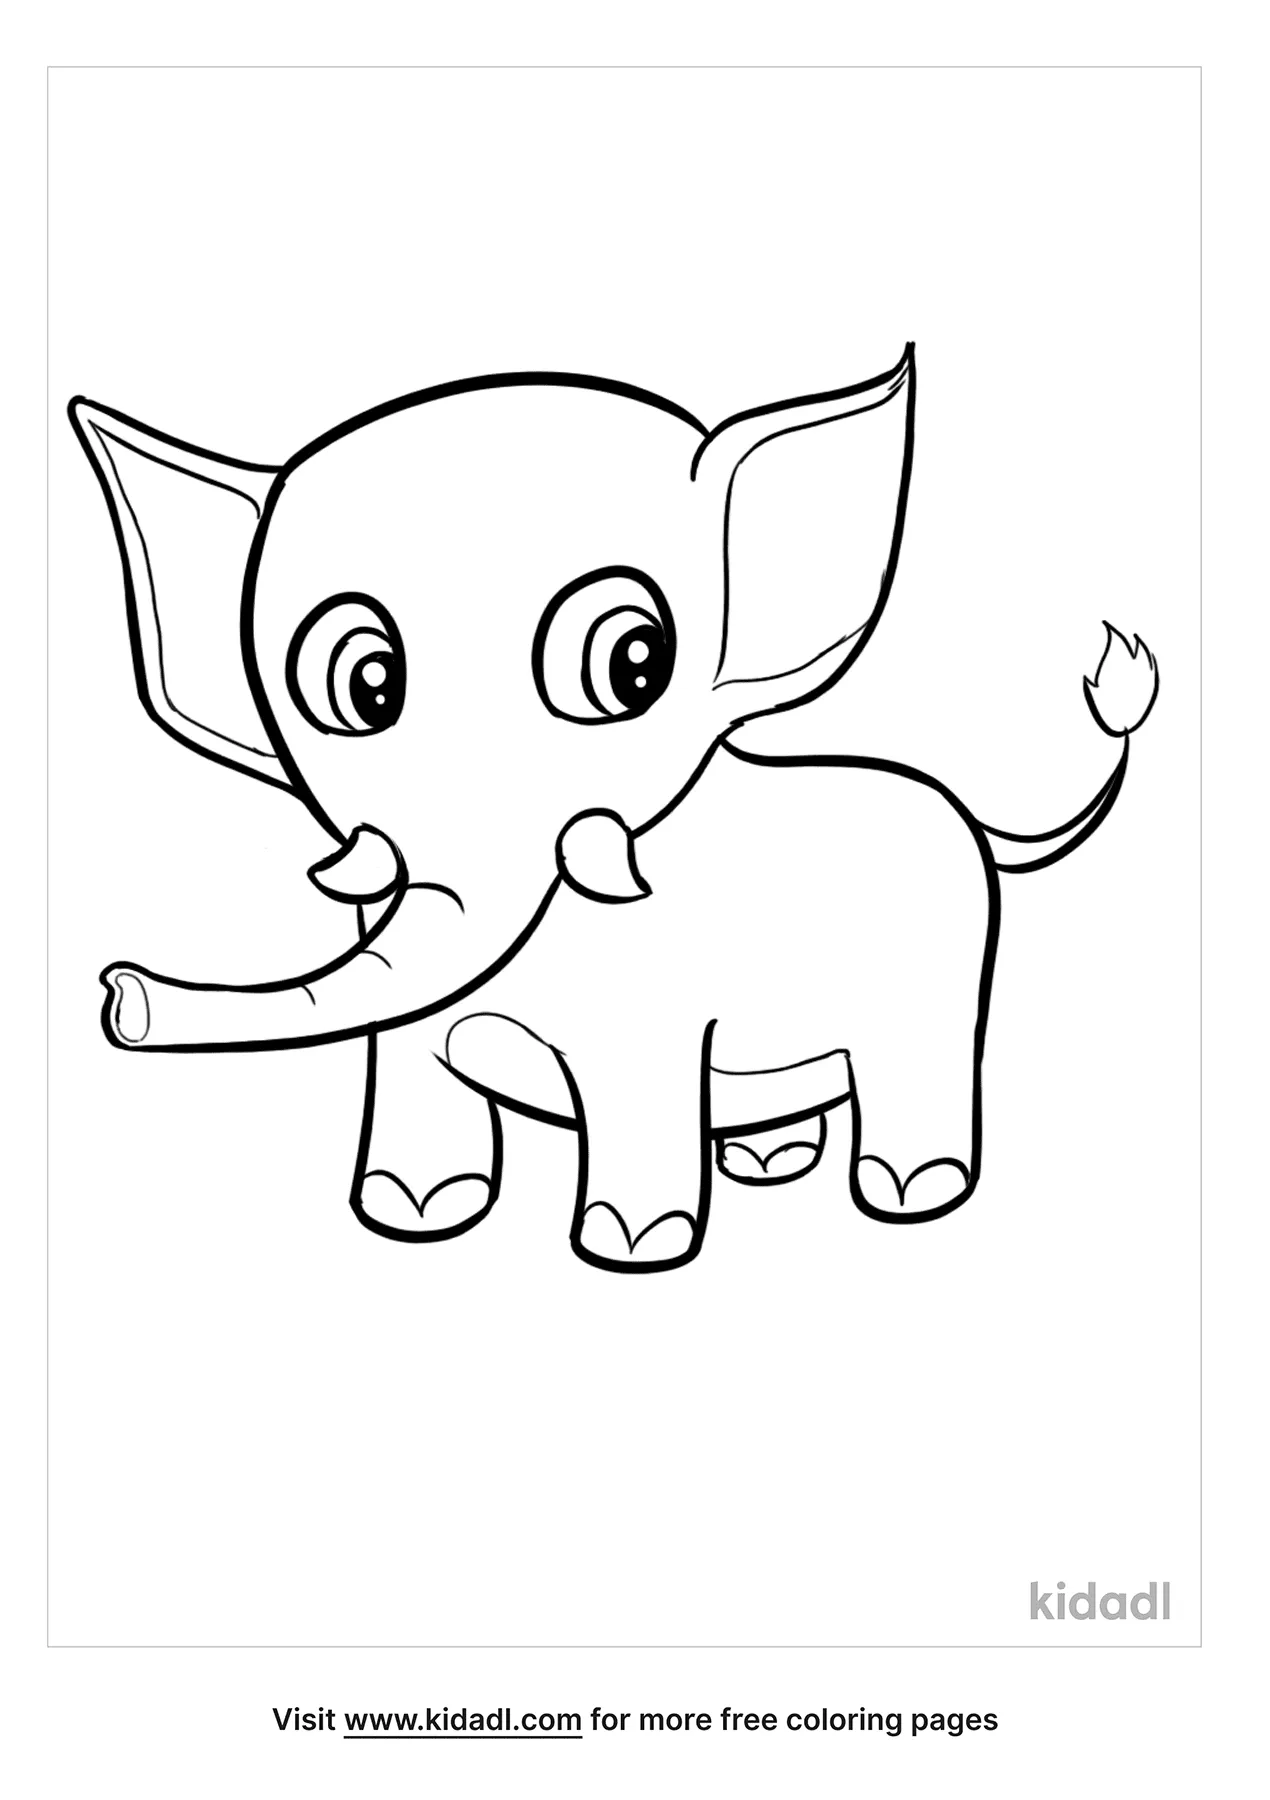 Baby Animal Coloring Pages   Free Farm animals Coloring Pages   Kidadl